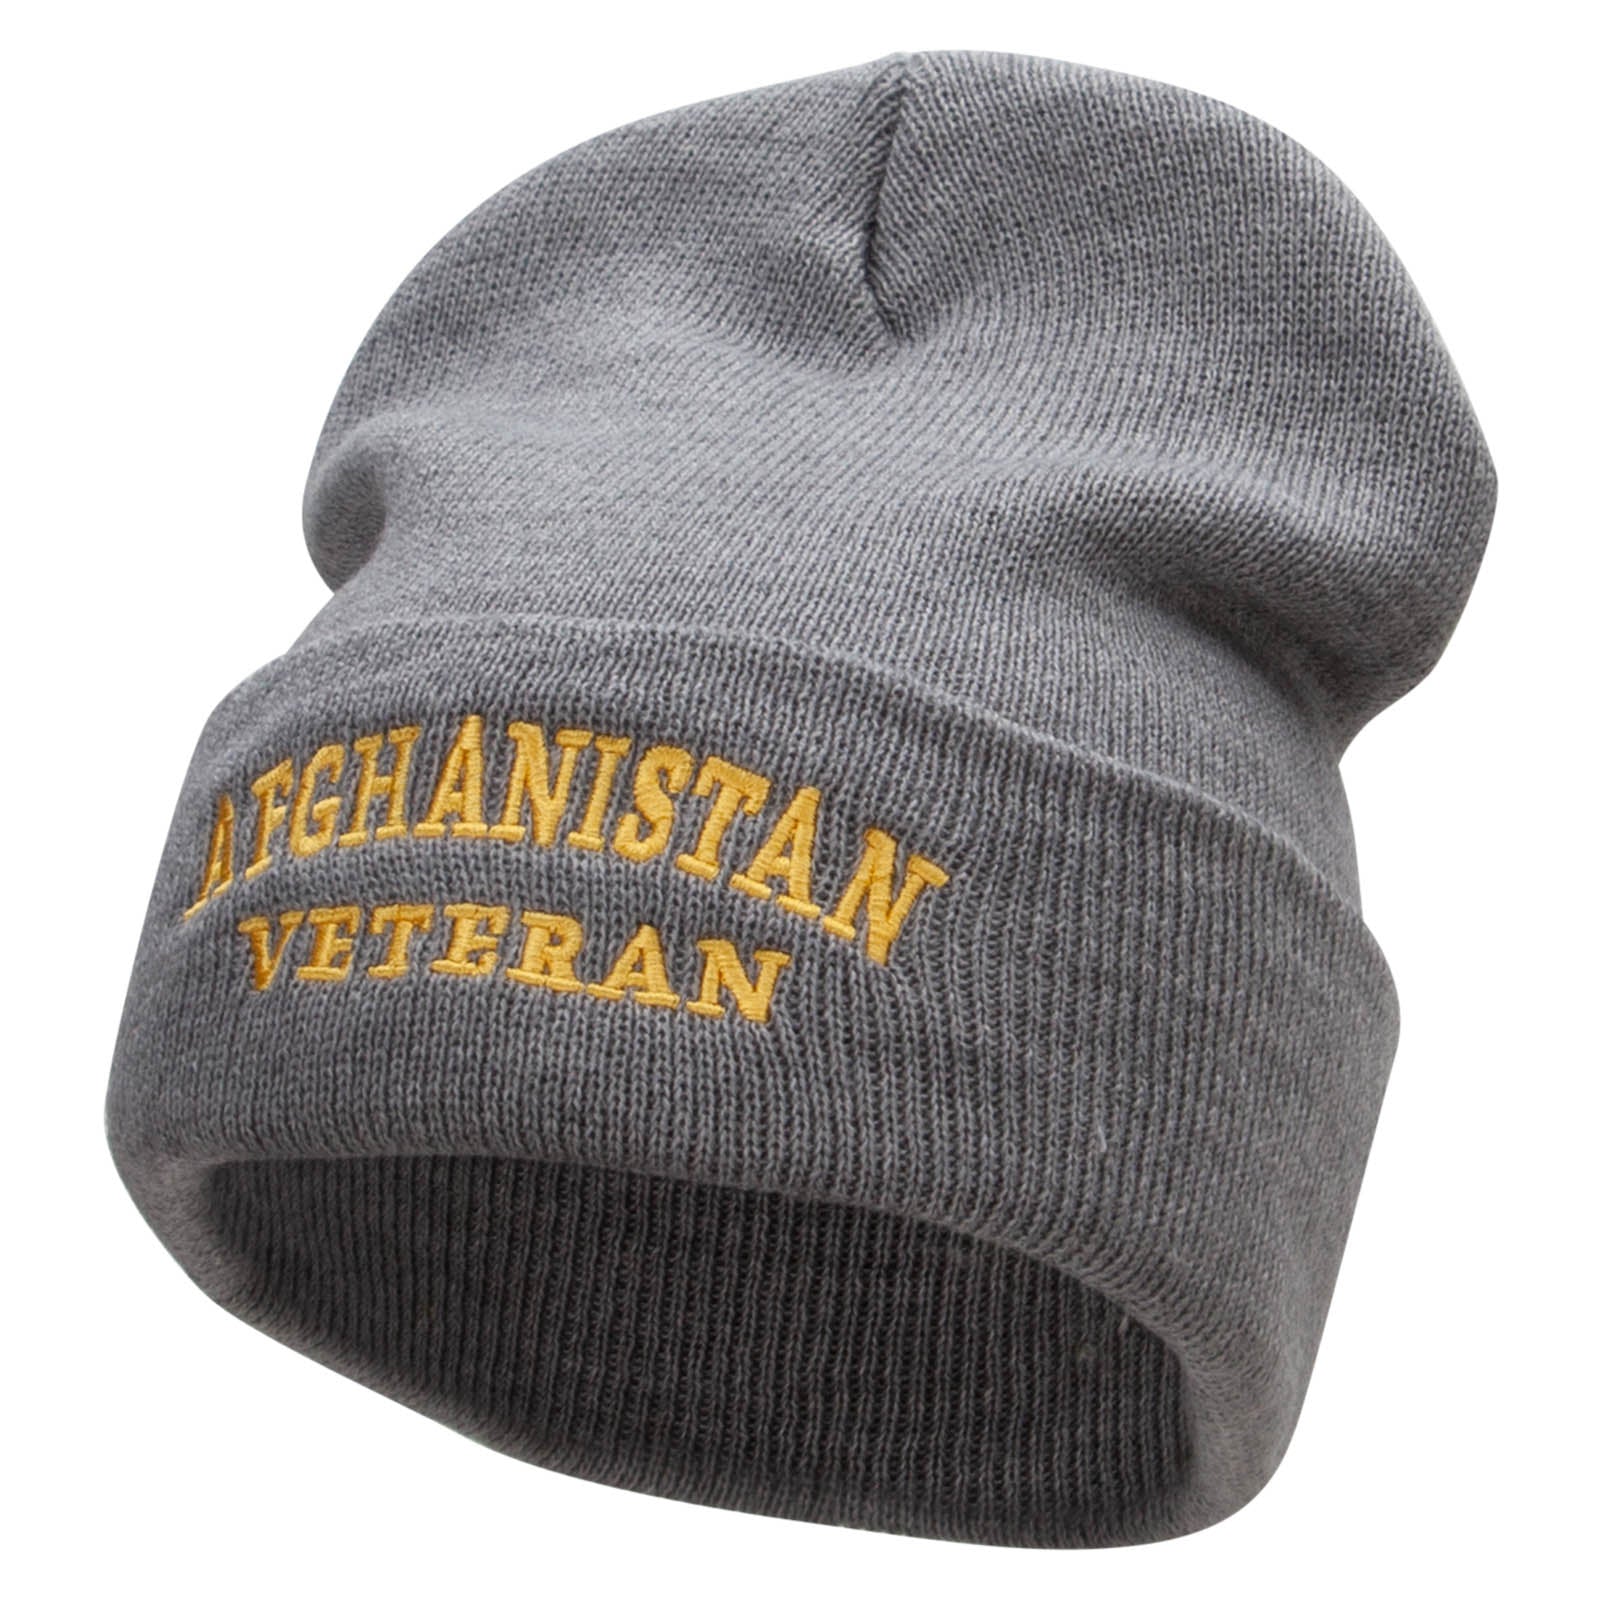 Afghanistan Vet Embroidered 12 Inch Solid Long Beanie Made in USA - Lt Grey OSFM